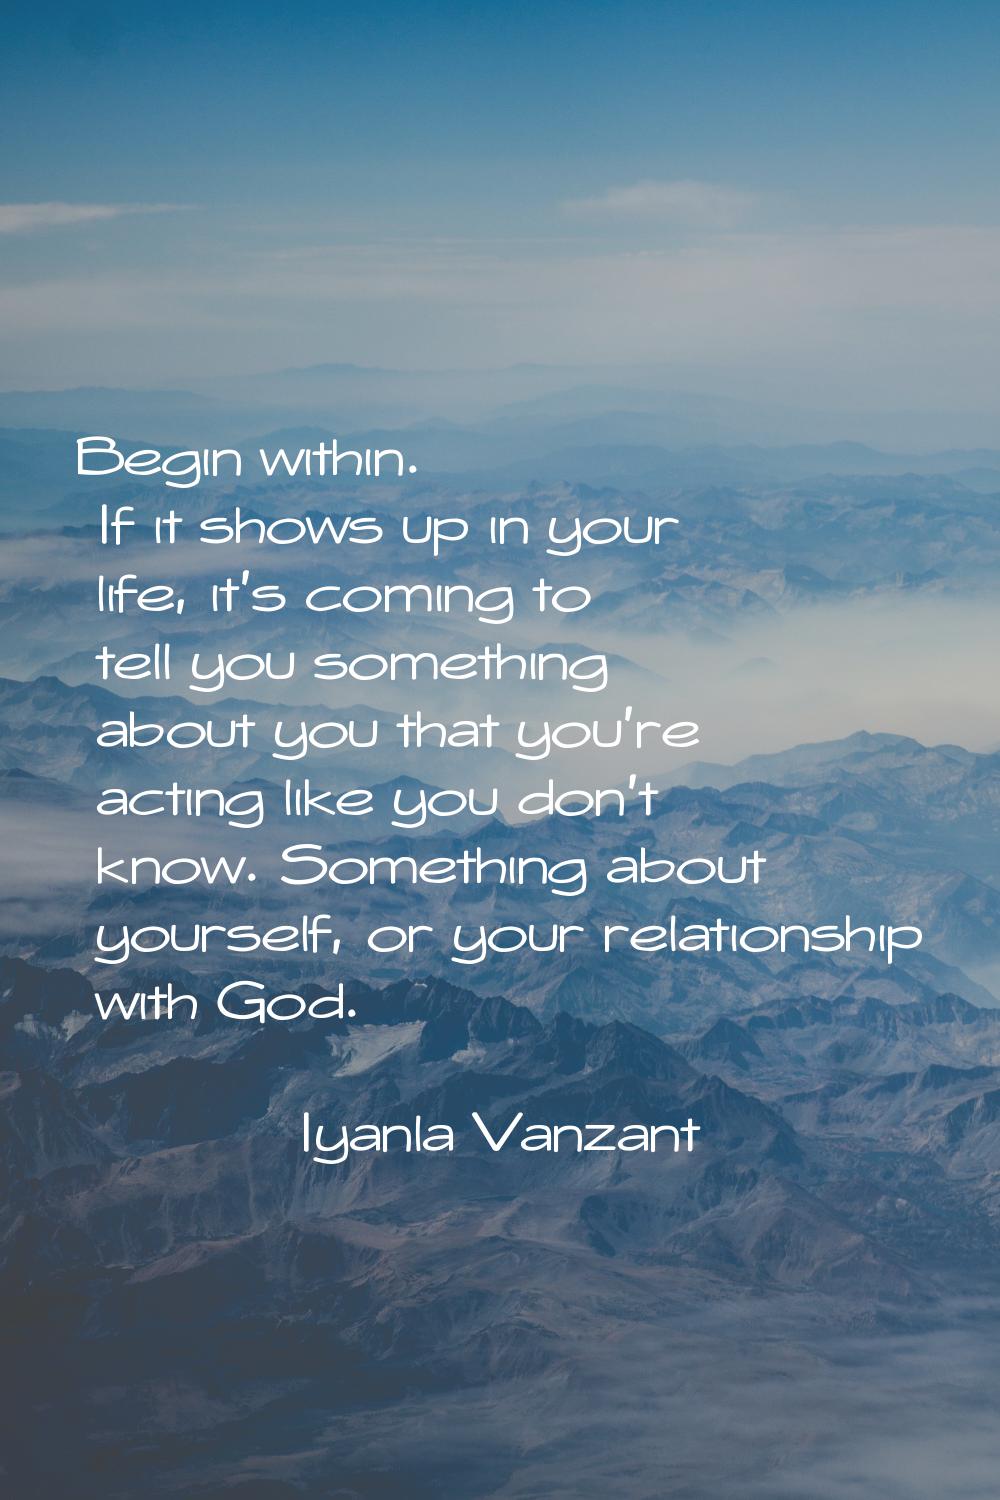 Begin within. If it shows up in your life, it's coming to tell you something about you that you're 